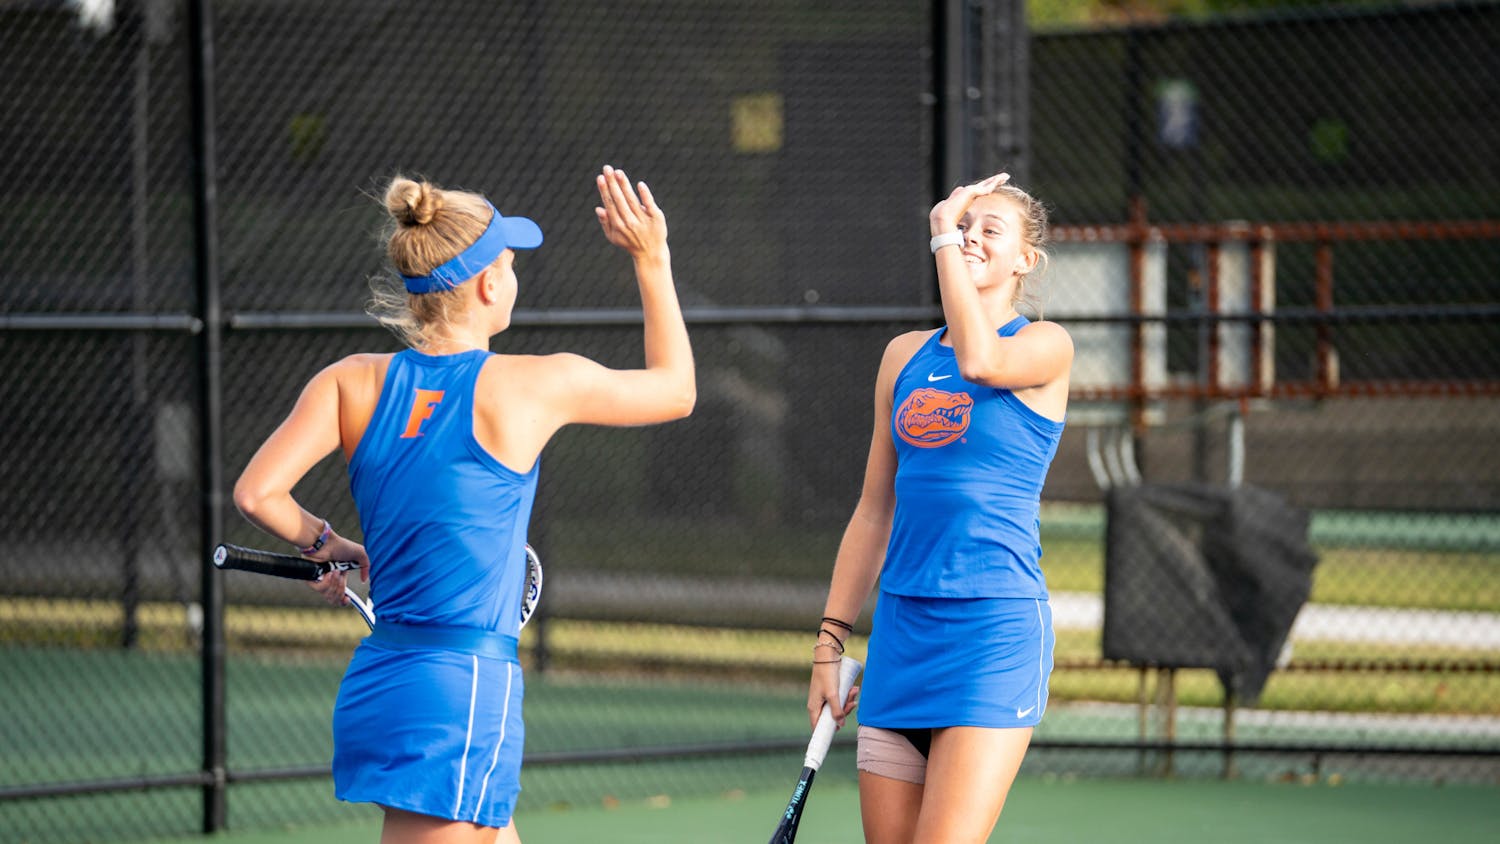 Florida sophomores Bente Spee (left) and Alicia Dudeney (right) at the ITA All-American Championships. Photo courtesy of the Intercollegiate Tennis Association.